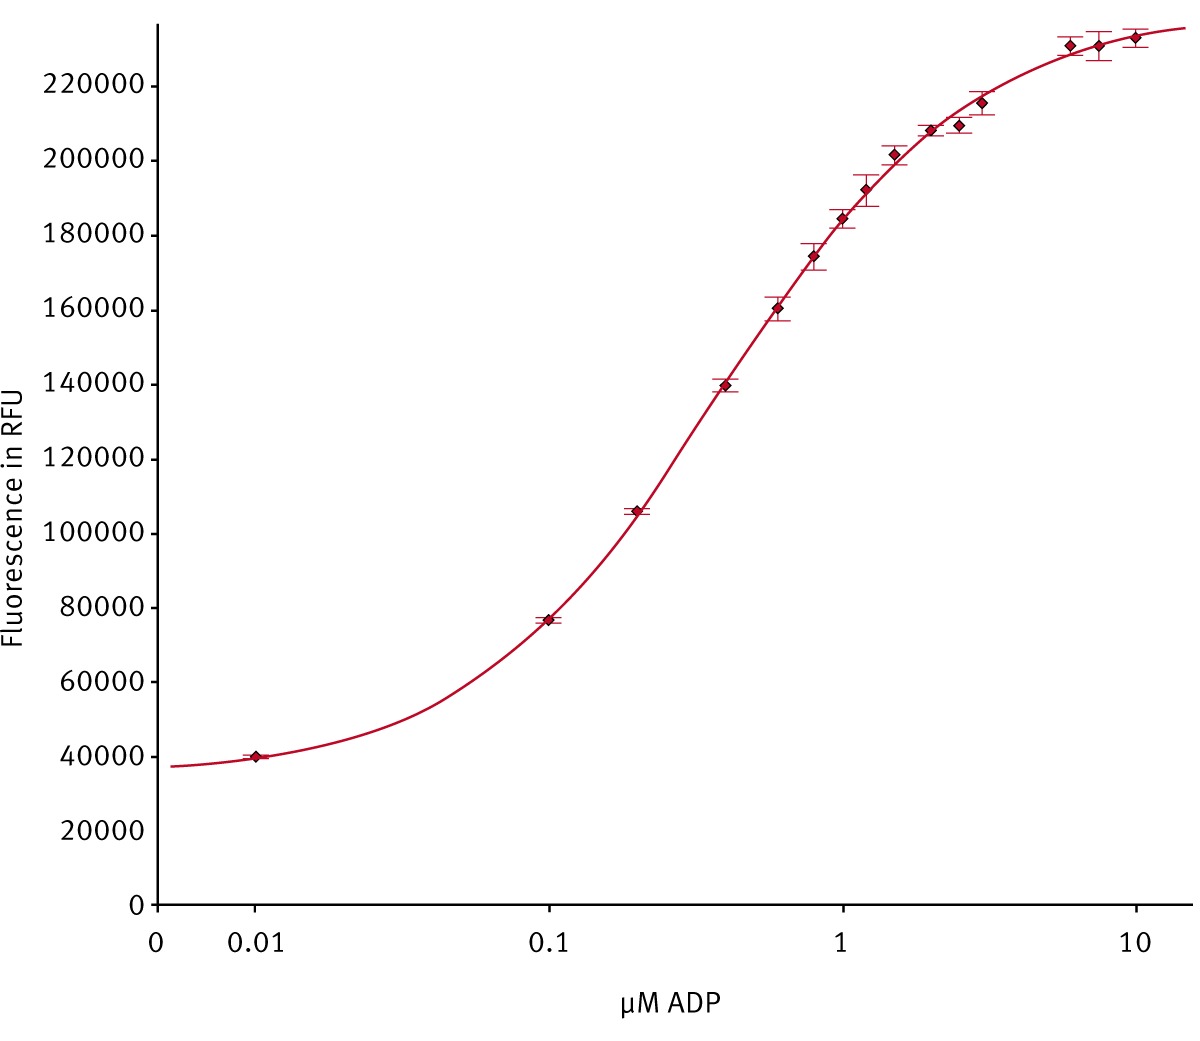 Fig.2: 10 μM ADP standard curve measured in 5 replicates using a PHERAstar FS in 384 well format (20 μL). The concentration of 0 μM ADP was set to 0.01 μM to allow logarithmic scaling.